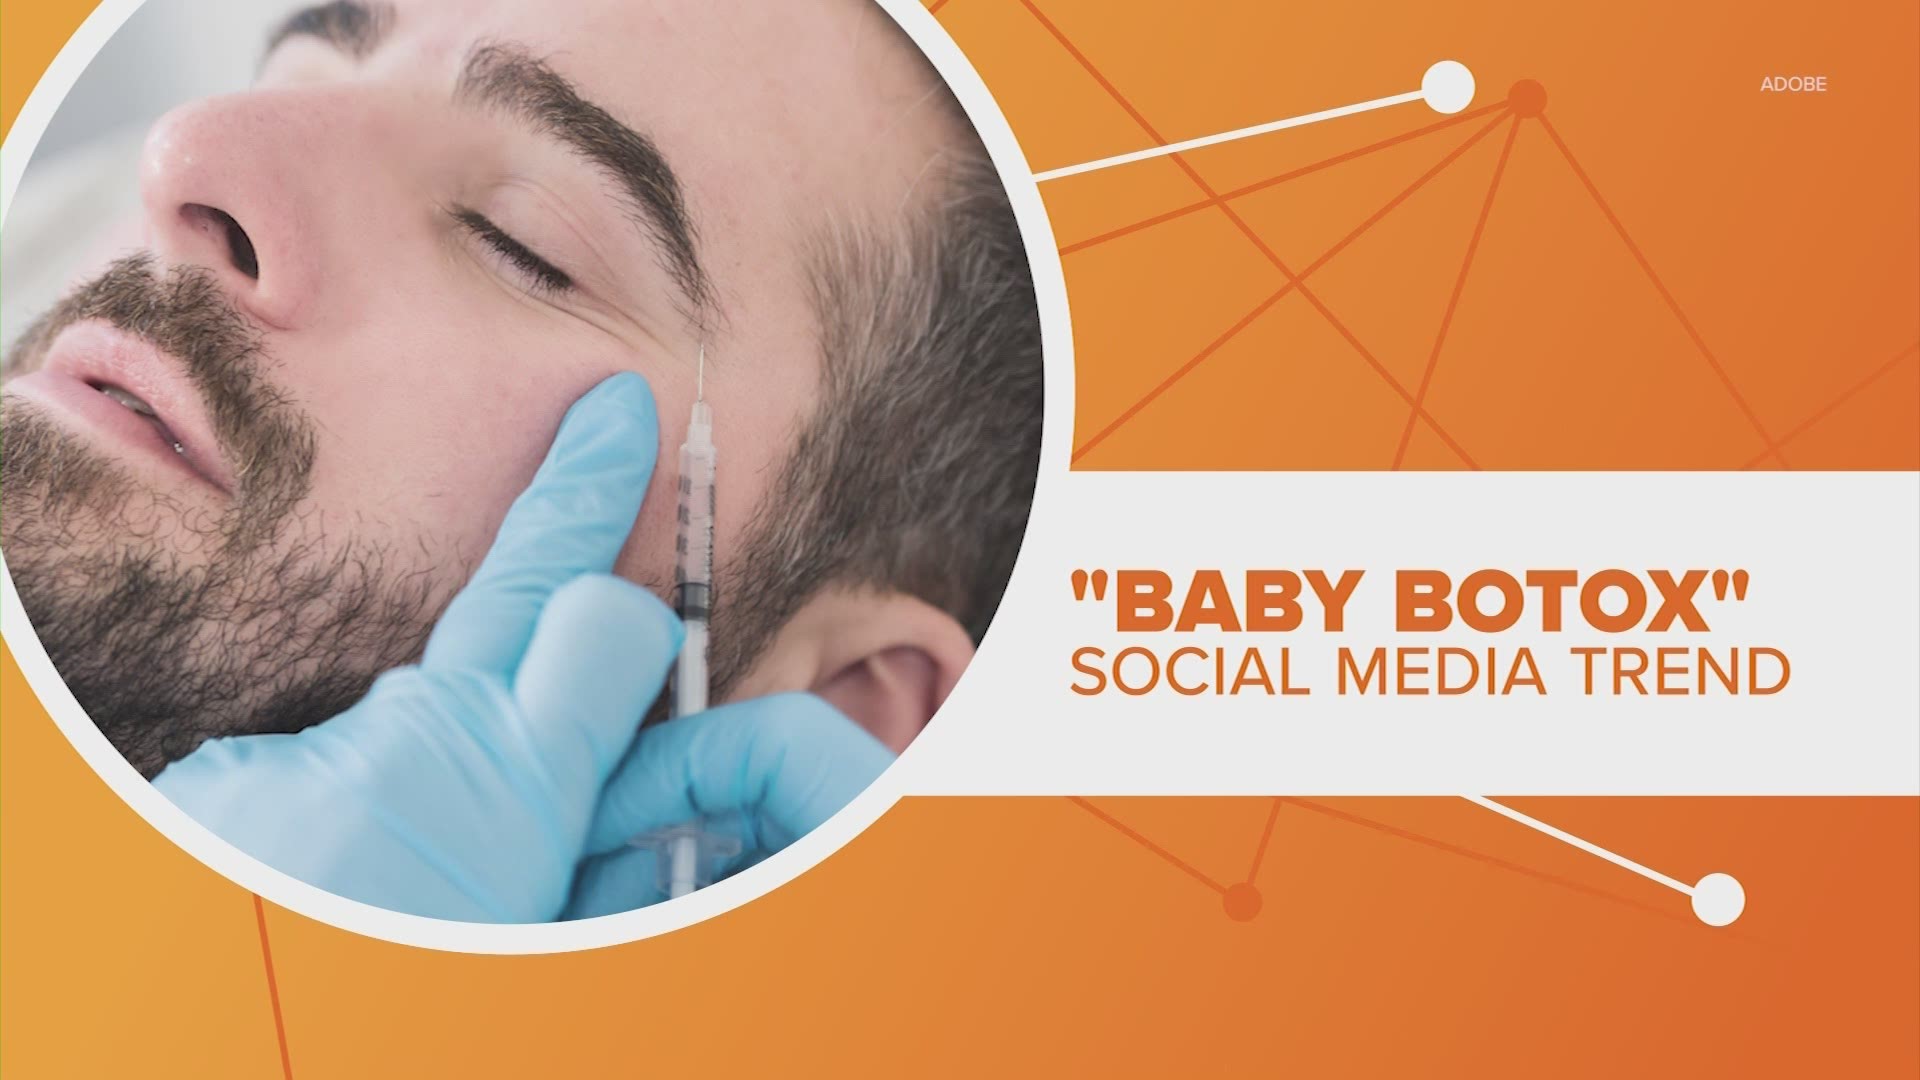 #HTownRush Connects the Dots on what doctors want people to know about the trend being called "Baby Botox"